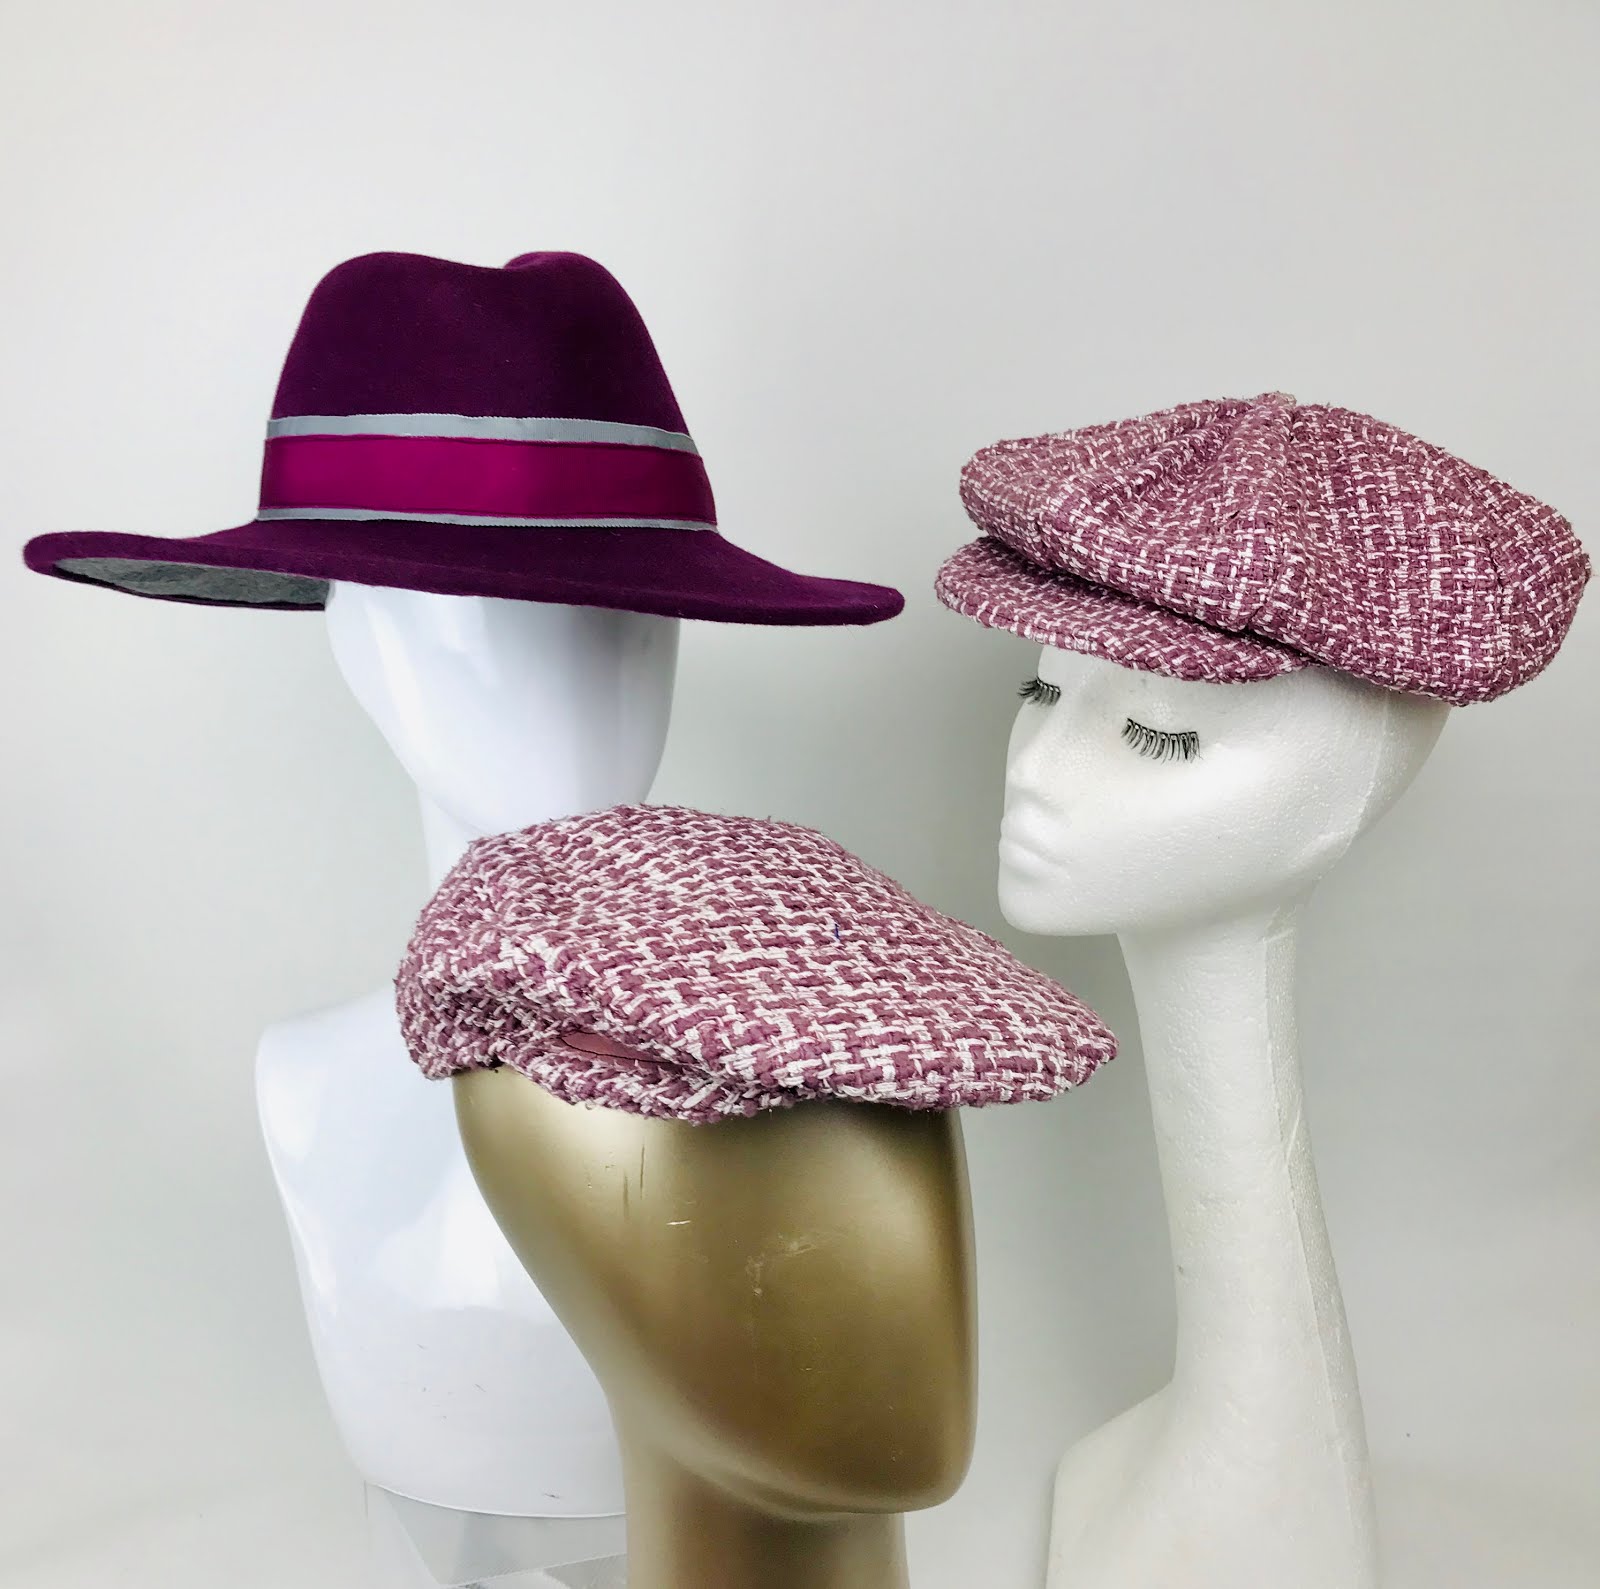 My hats in Etsy